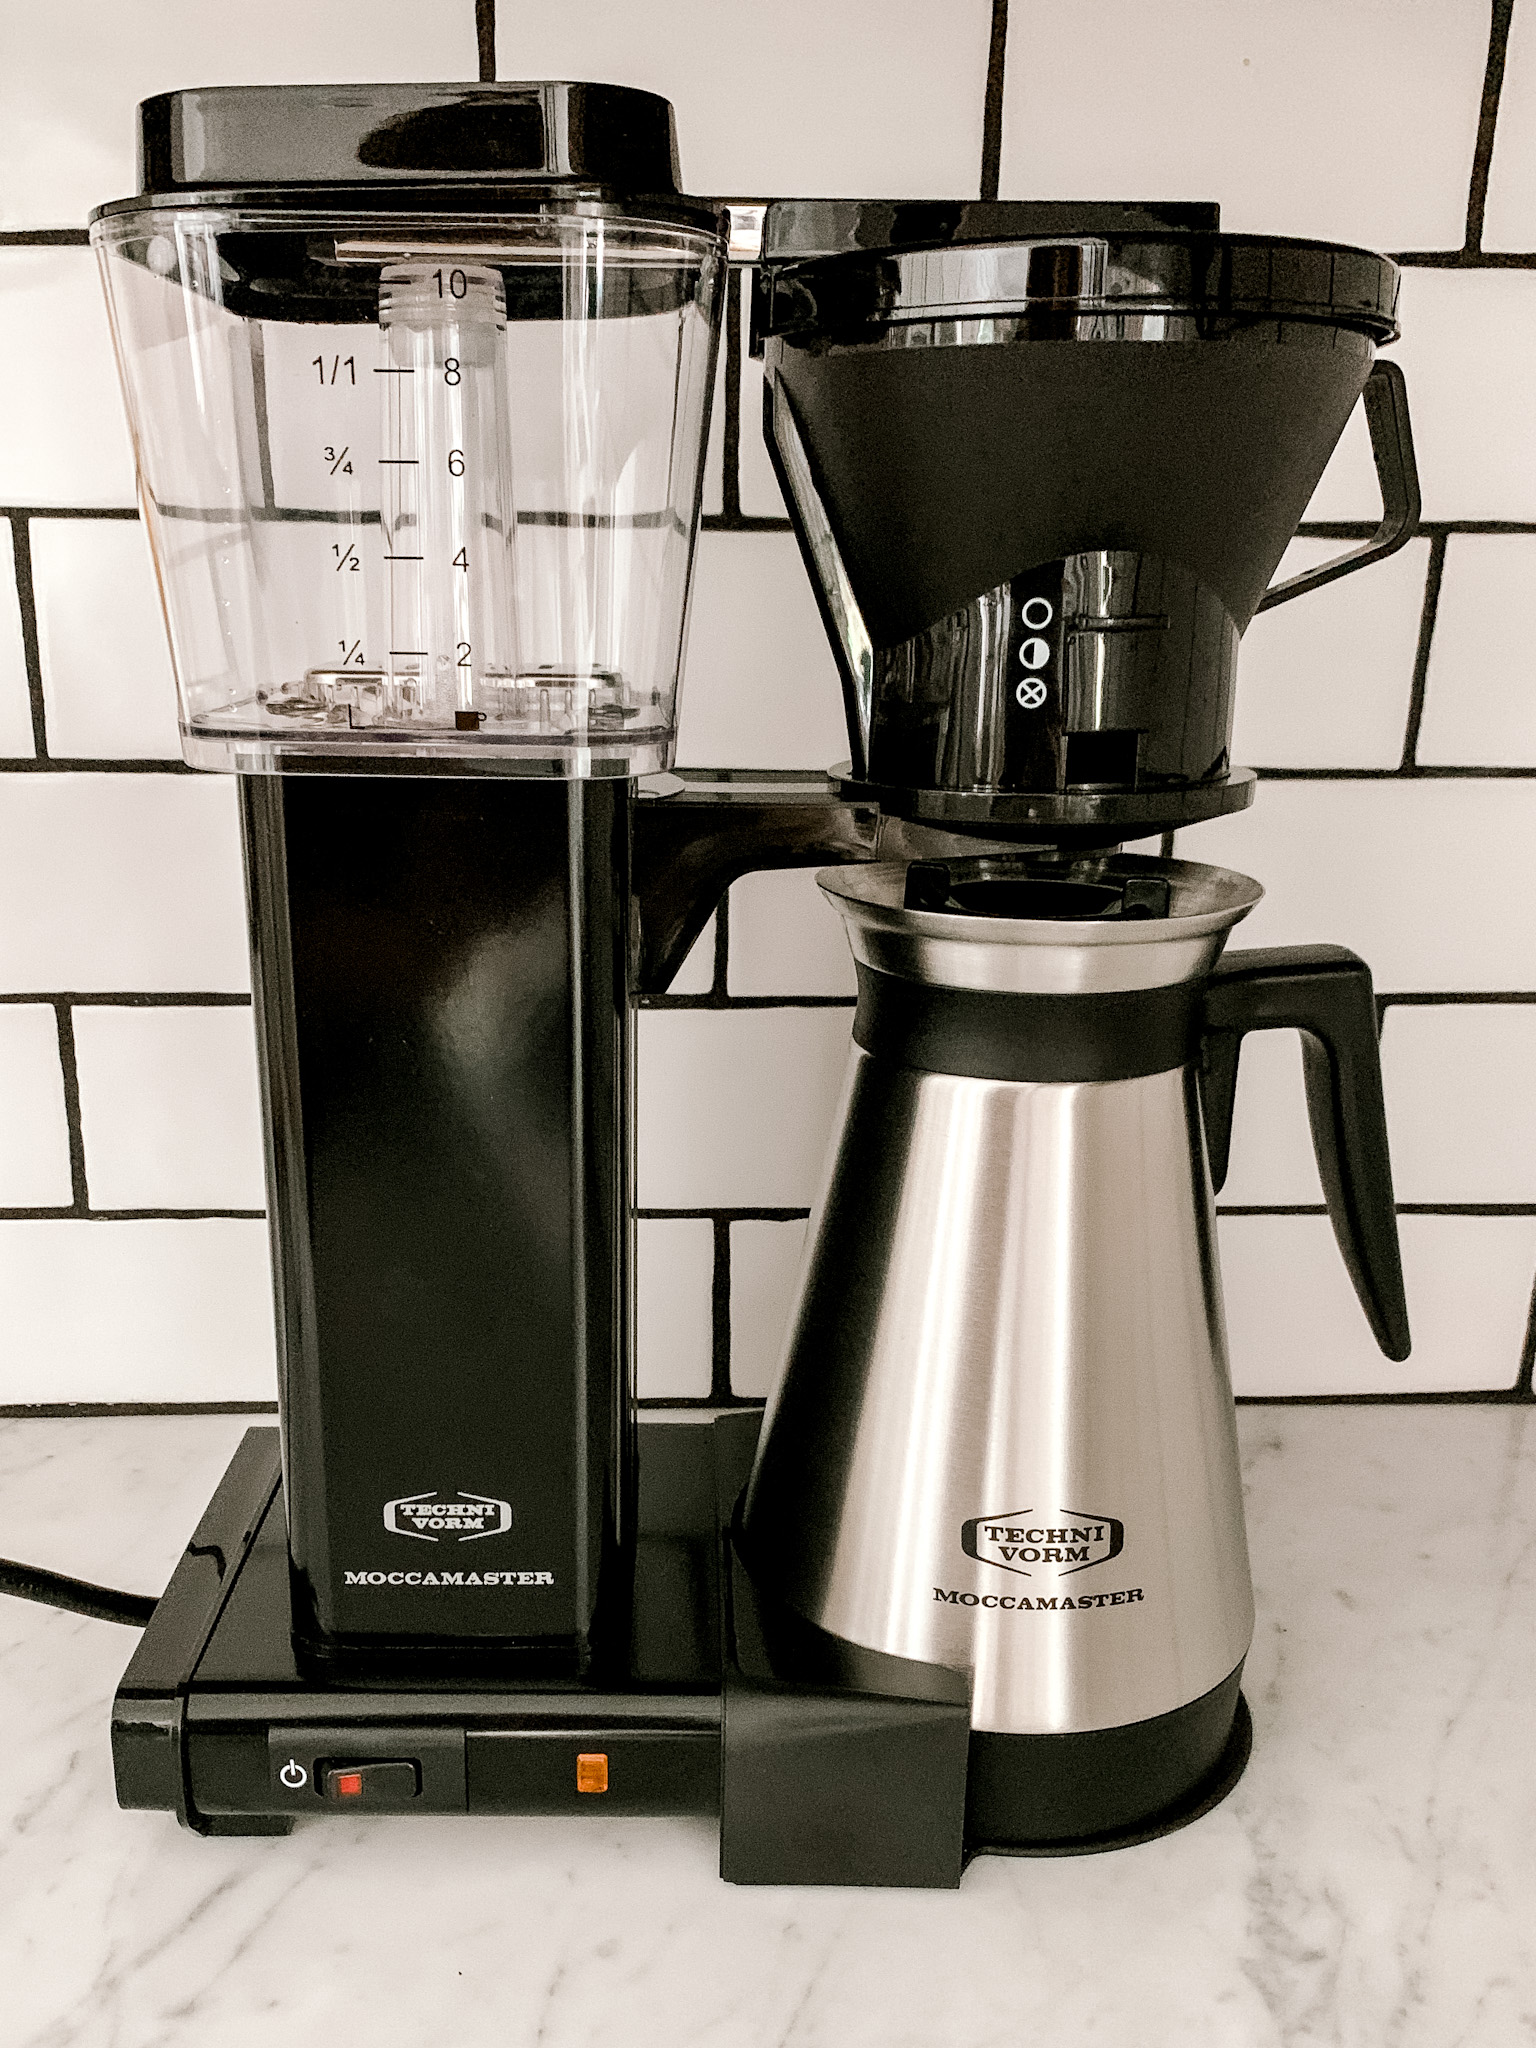 Top Smart Coffee Makers for Work from Home Motivation ThinkTel Blog